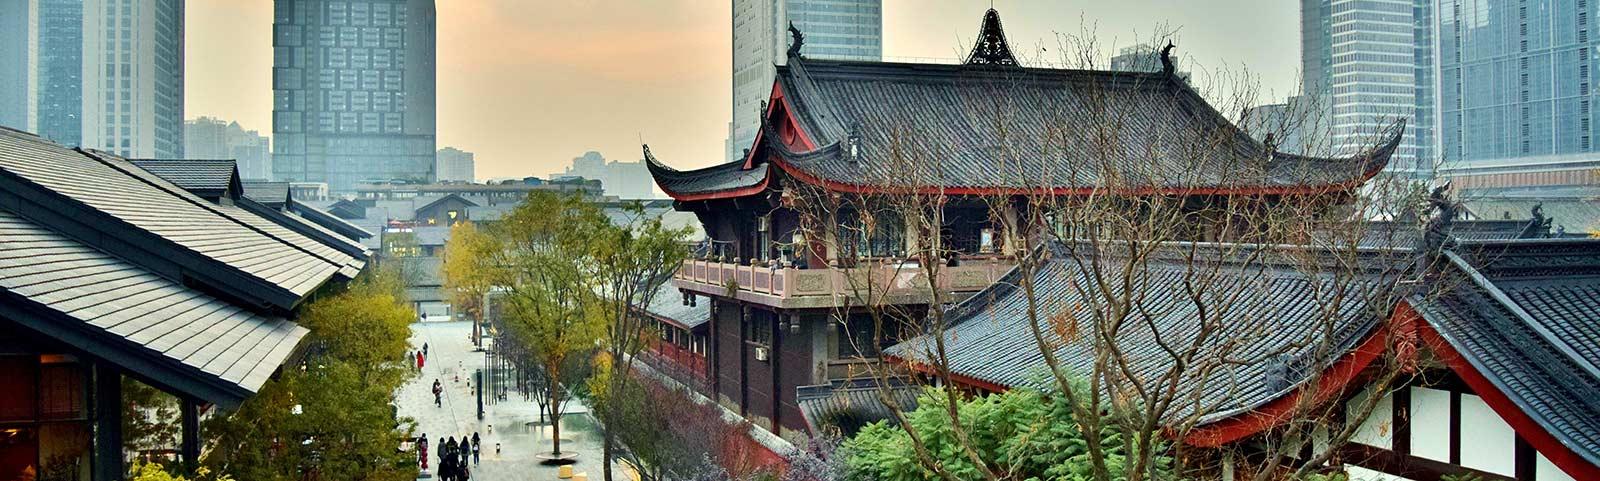 Why Design Lovers Should Consider a Trip to Chengdu, China